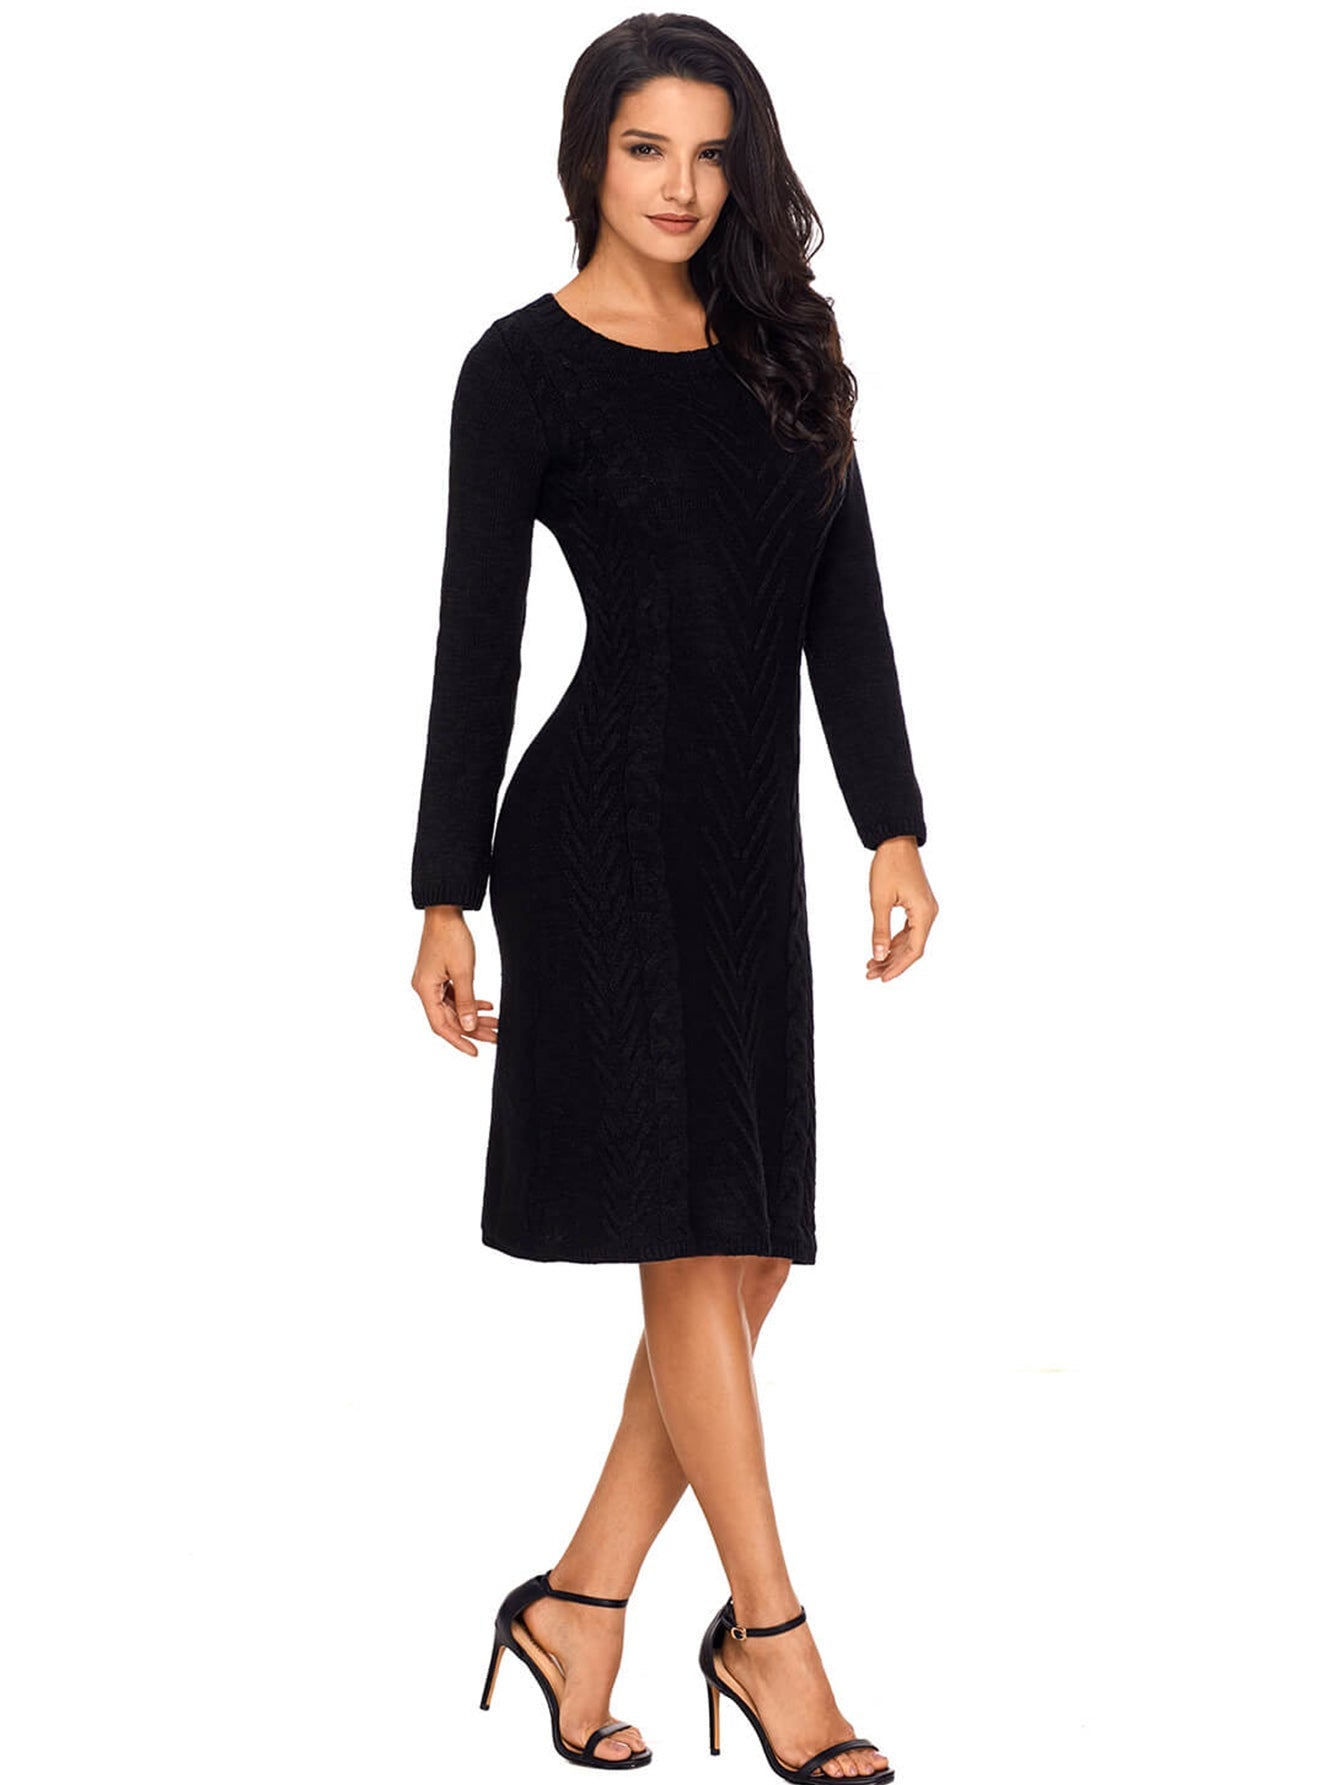 Women's Winter Casual Long Sleeve Solid Color Bodycon Warm Crewneck Knitted Sweater Dress Sai Feel